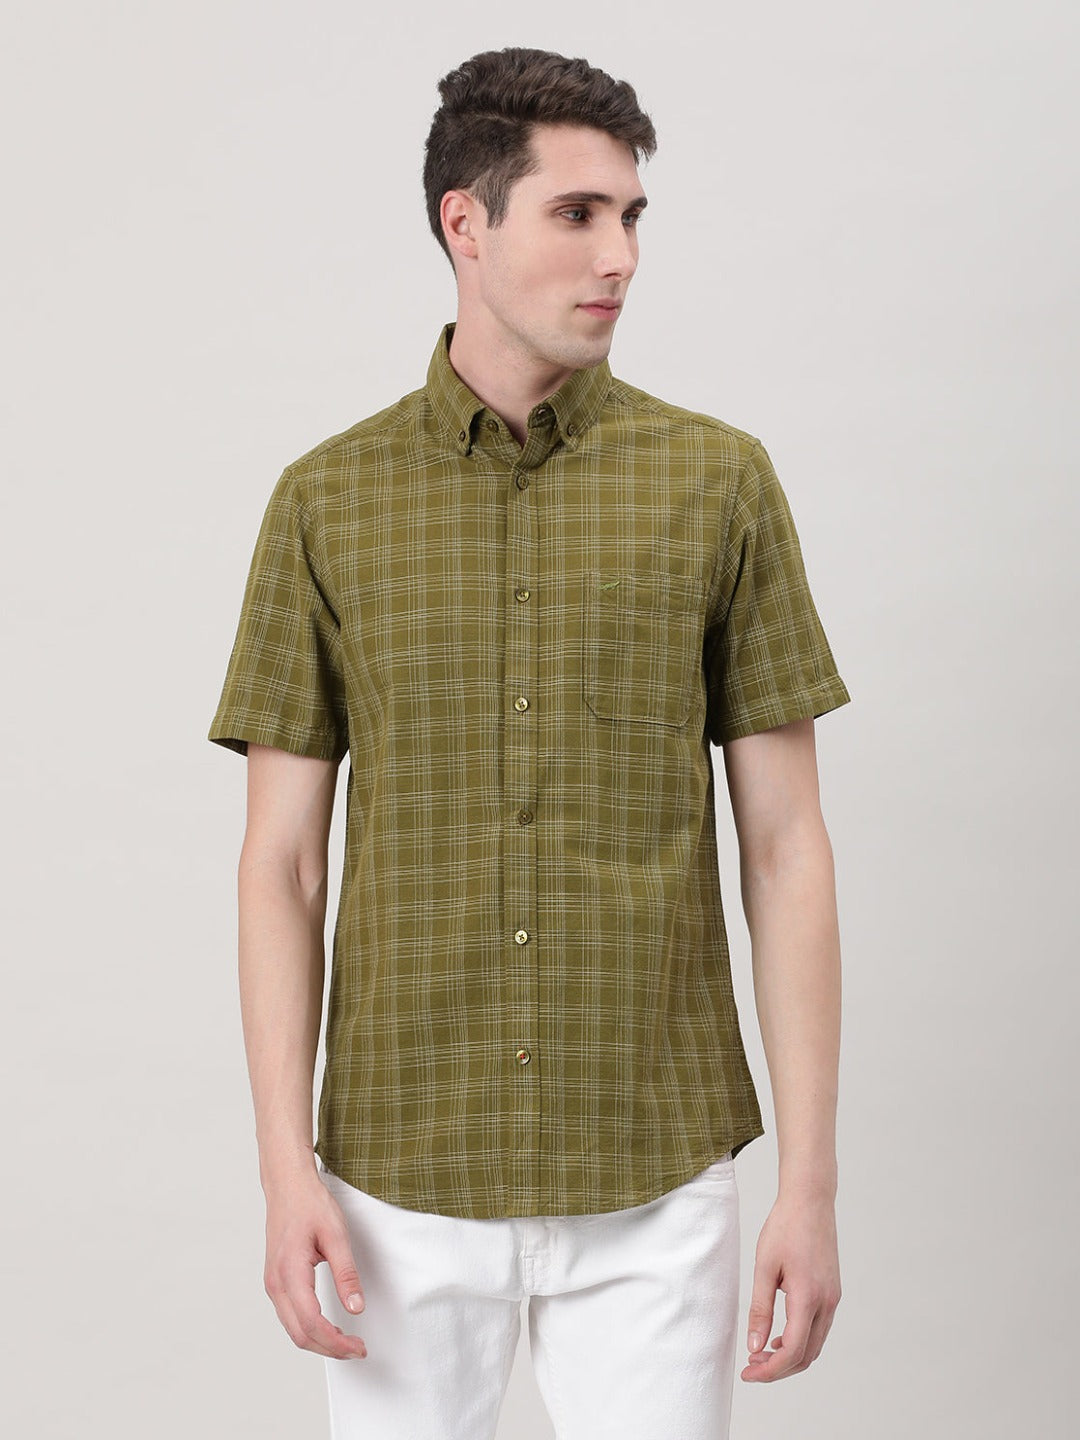 Casual Half Sleeve Comfort Fit Checks Shirt Olive with Collar